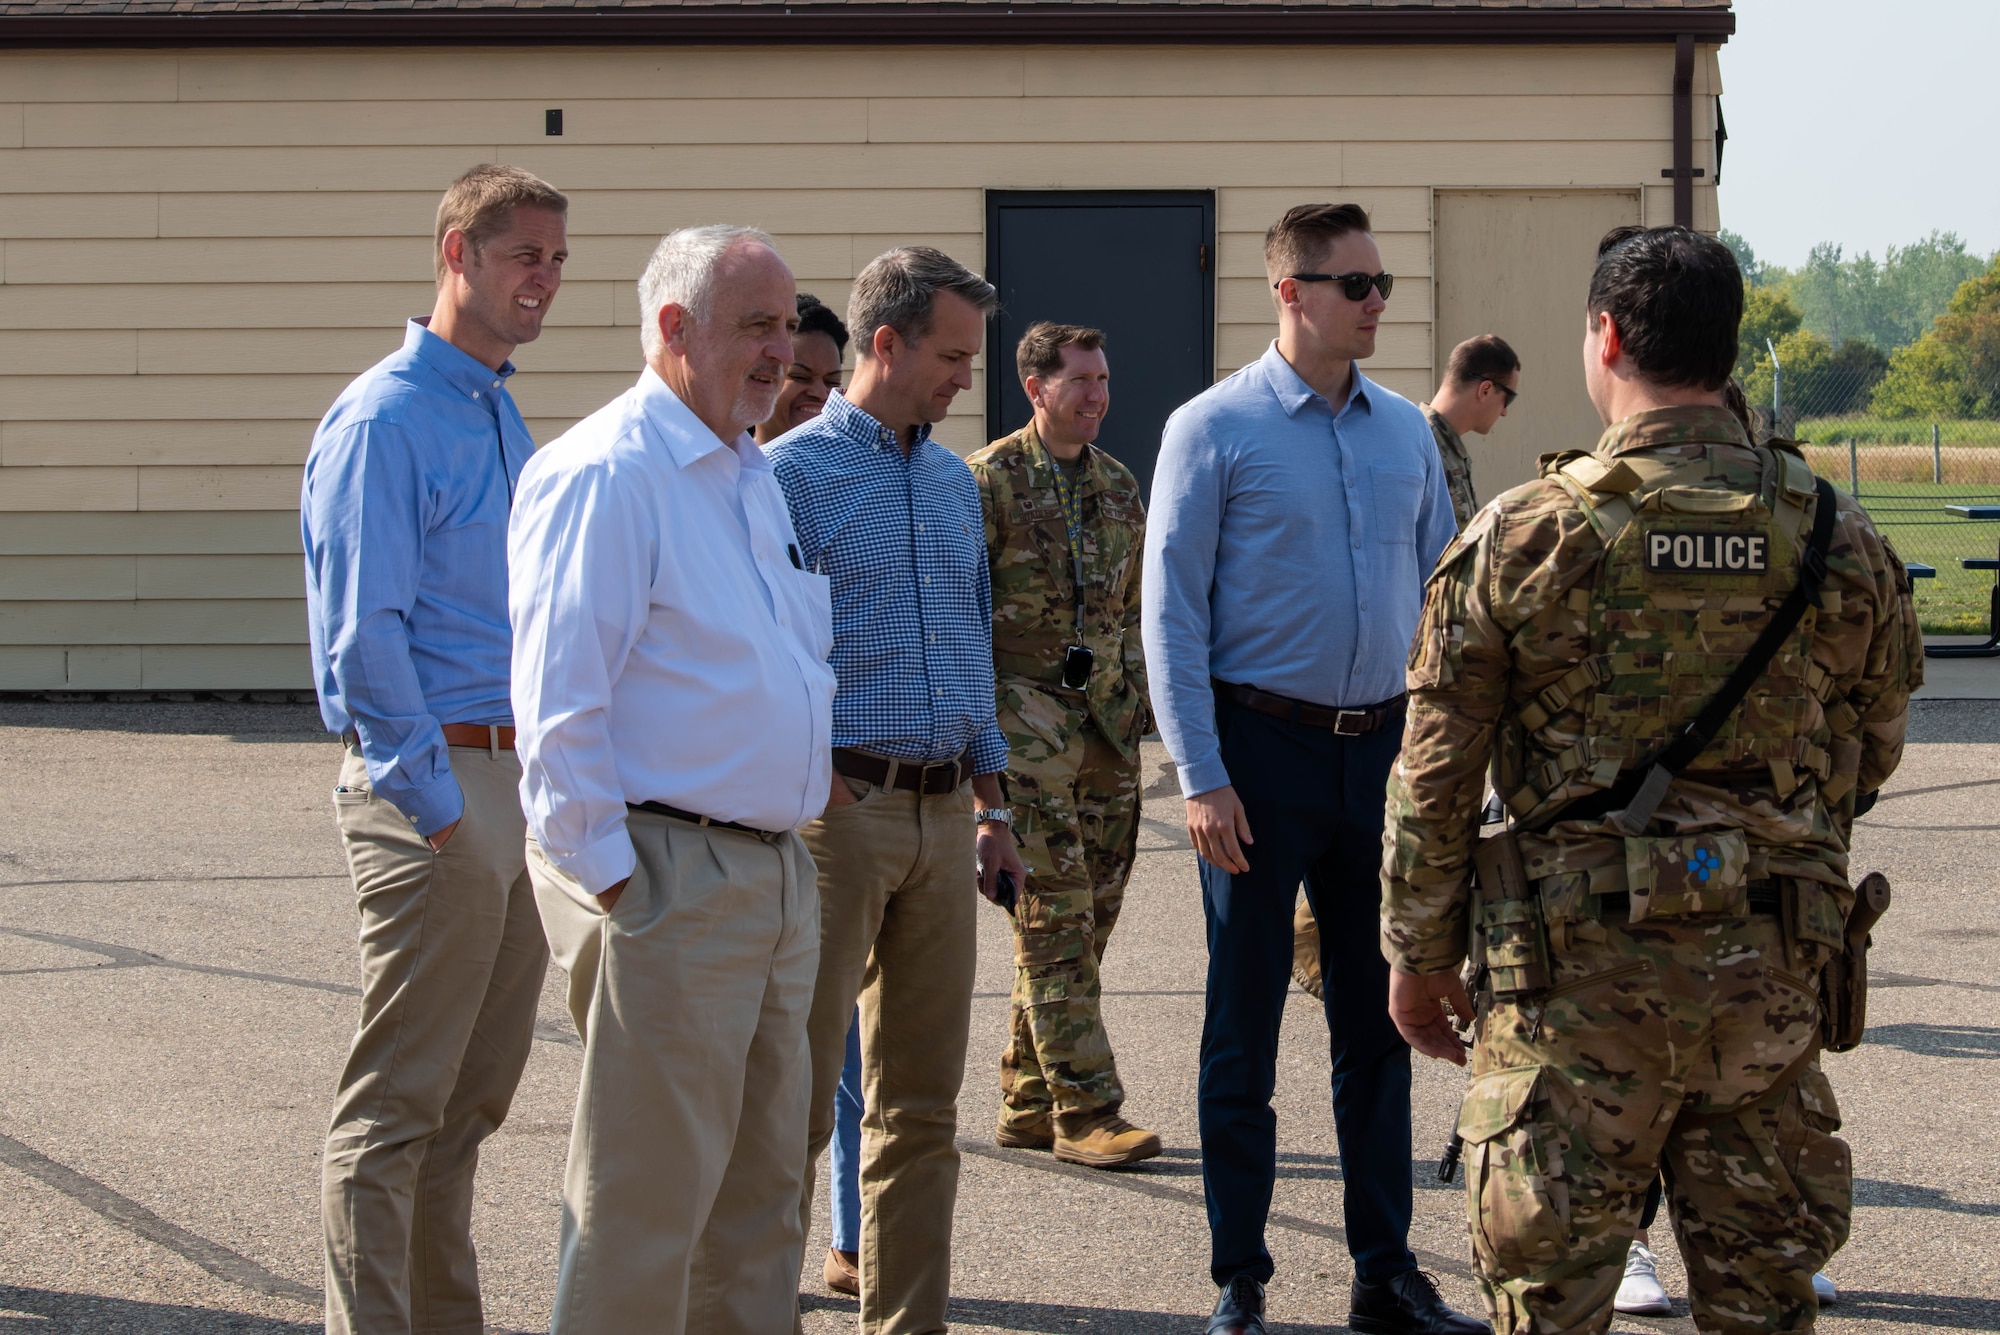 Minot Air Force Base leadership and members of The United States Senate Committee on Armed Services receive a demonstration at Missile Alert Facility Oscar-1 tour at Minot, North Dakota, Aug. 30, 2023. Tours like this allow team Minot to demonstrate our capabilities to our civilian partners. (U.S. Air Force Photo by Airman 1st Class Alexander Nottingham)